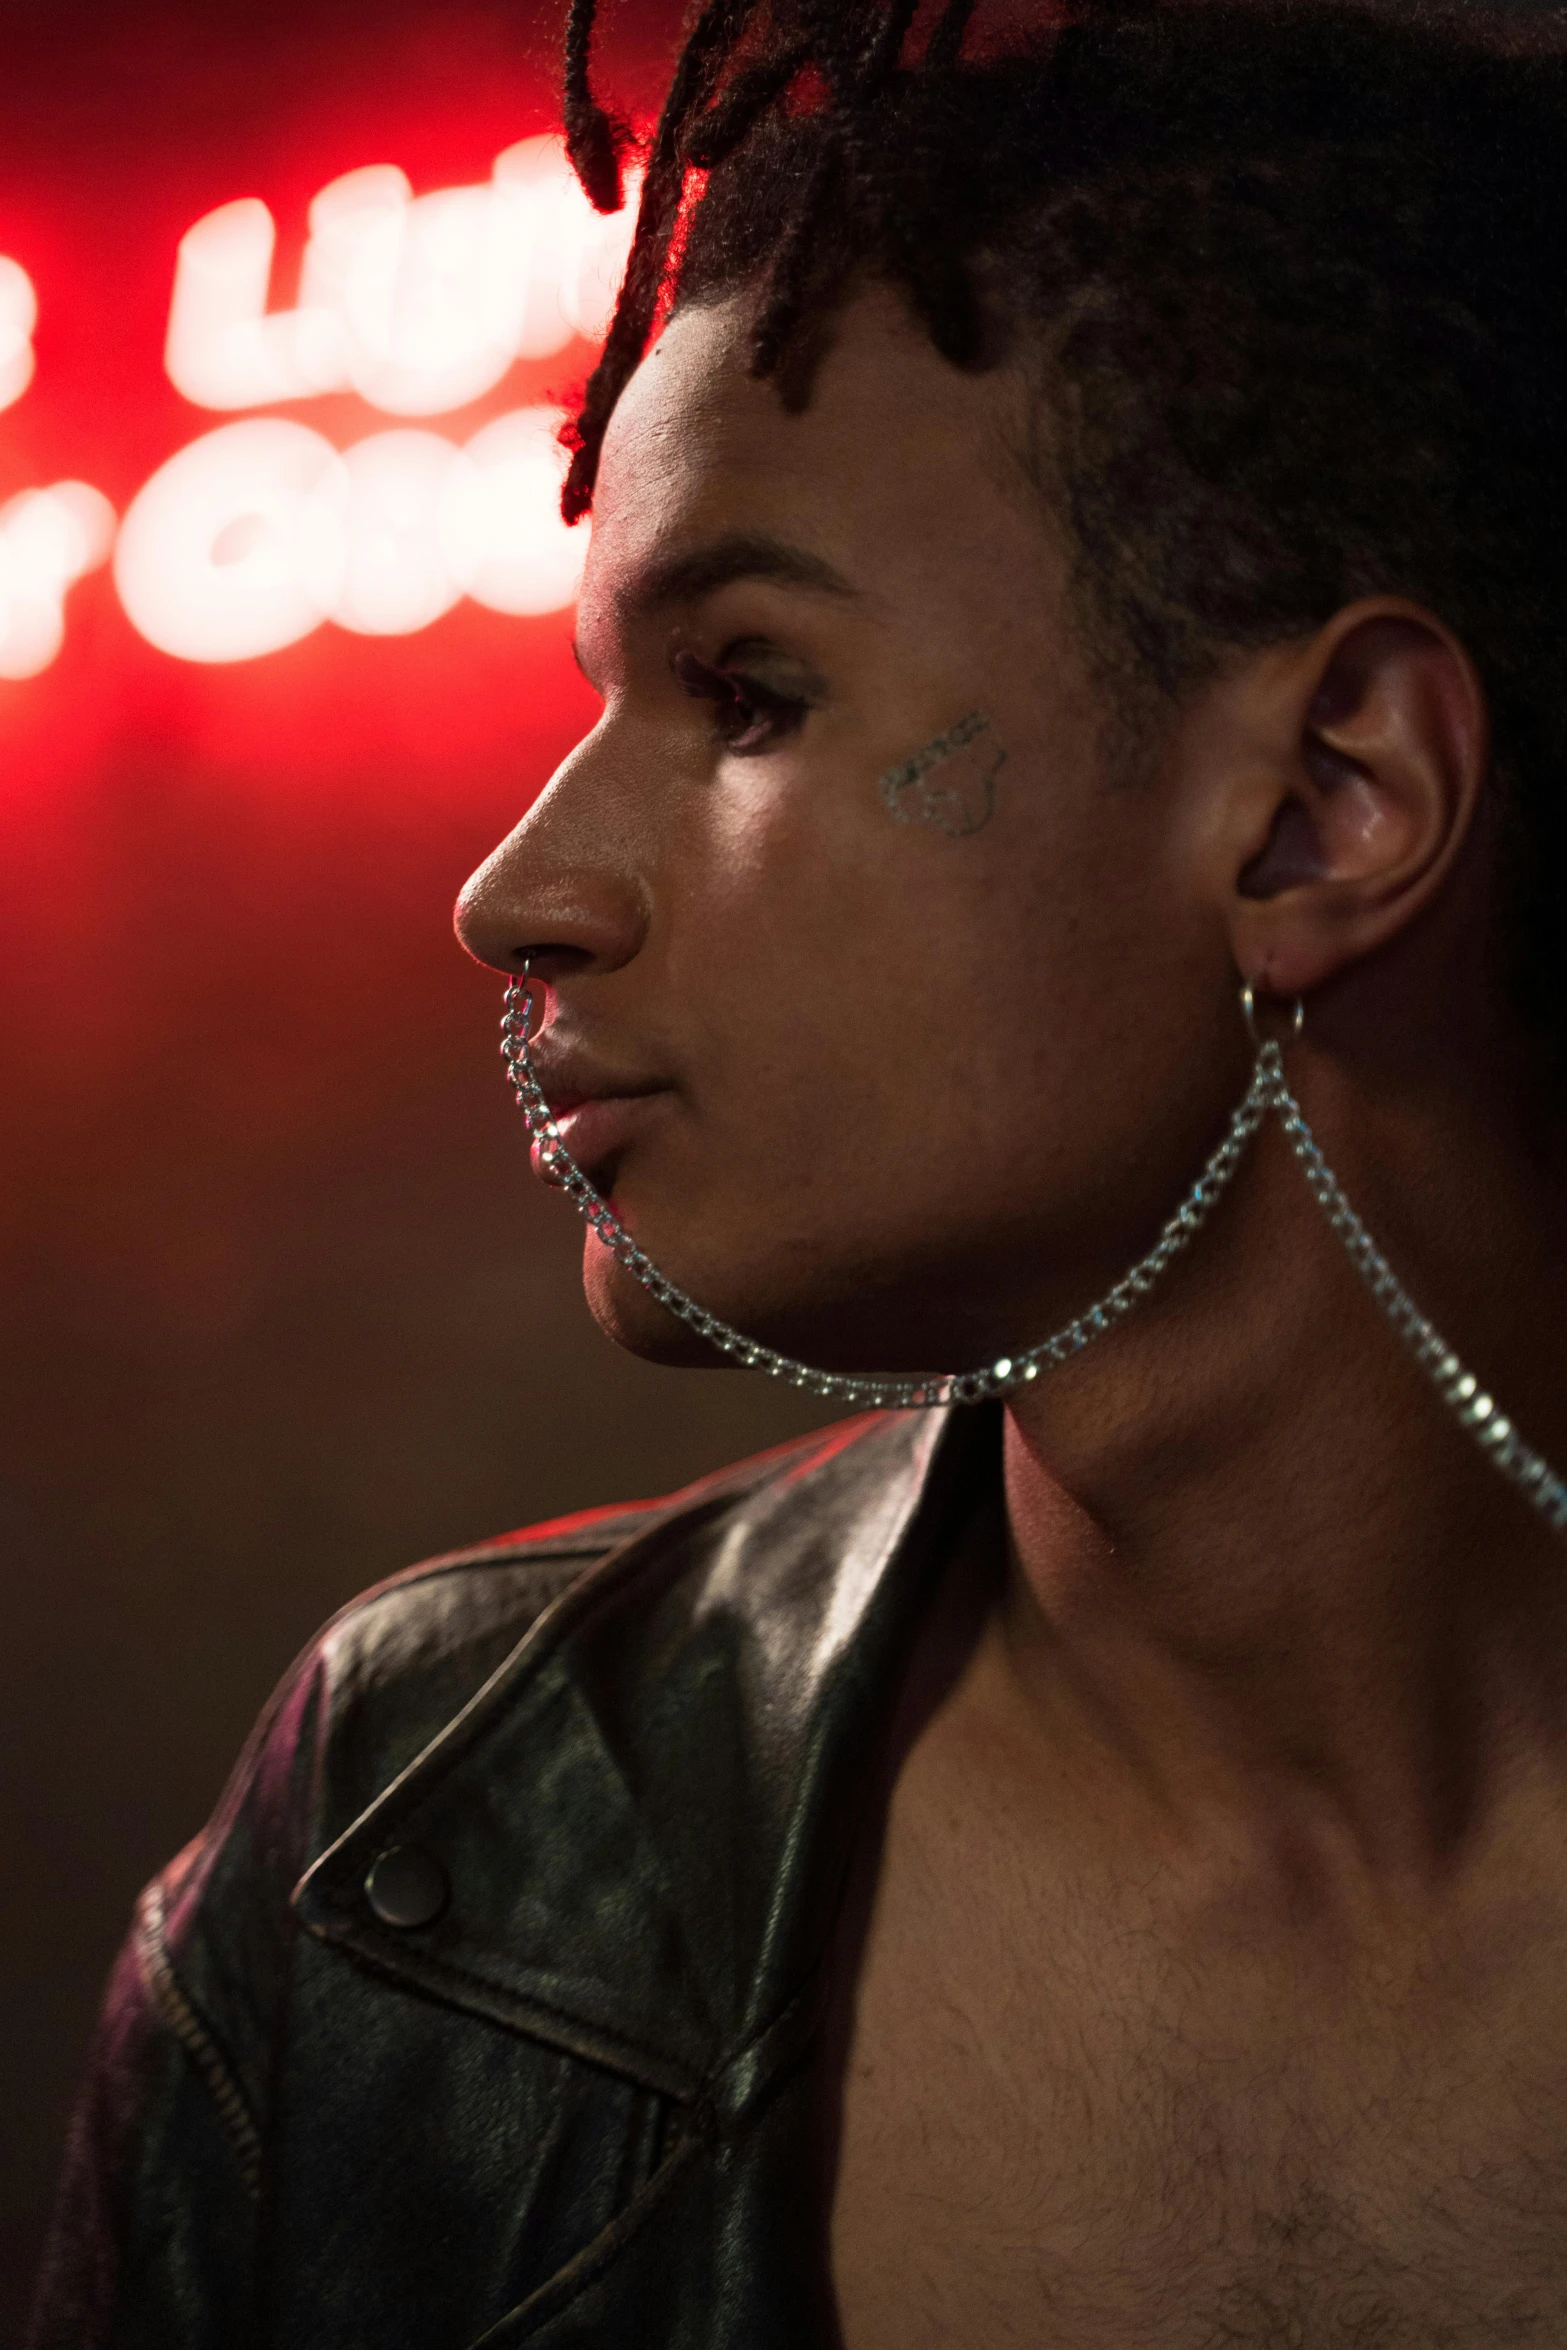 a man with big hoop earring and spiked piercings standing in front of a neon sign